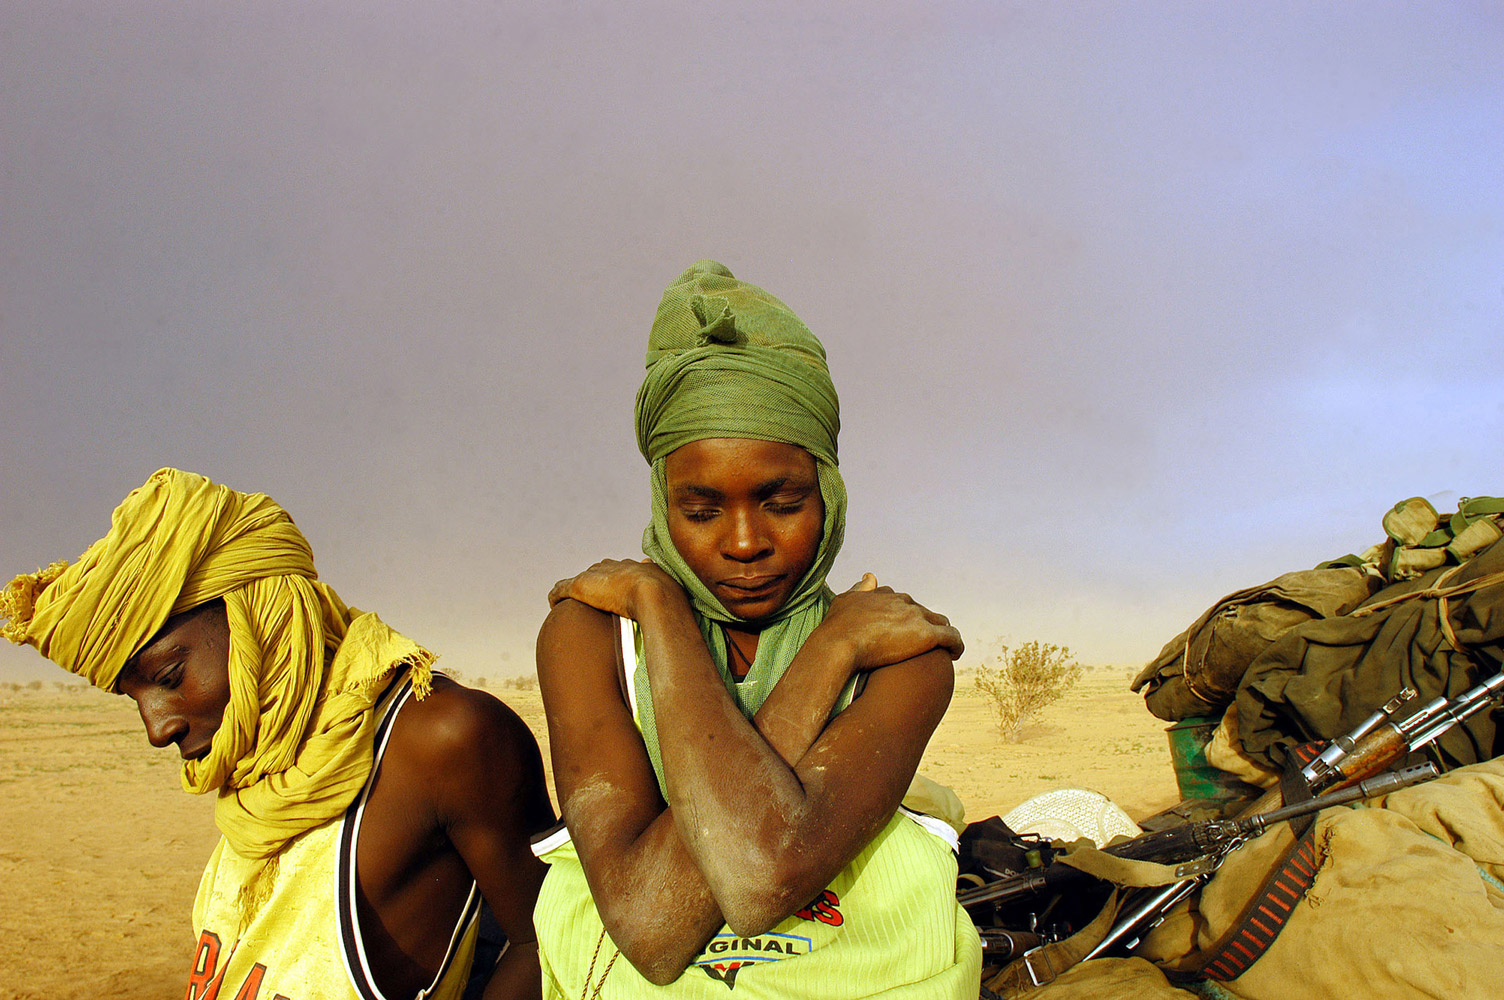 Masters Talk ArtistAug. 21, 2004. Soldiers with the Sudanese Liberation Army sit by their truck while struck in the mud in Darfur, Sudan.